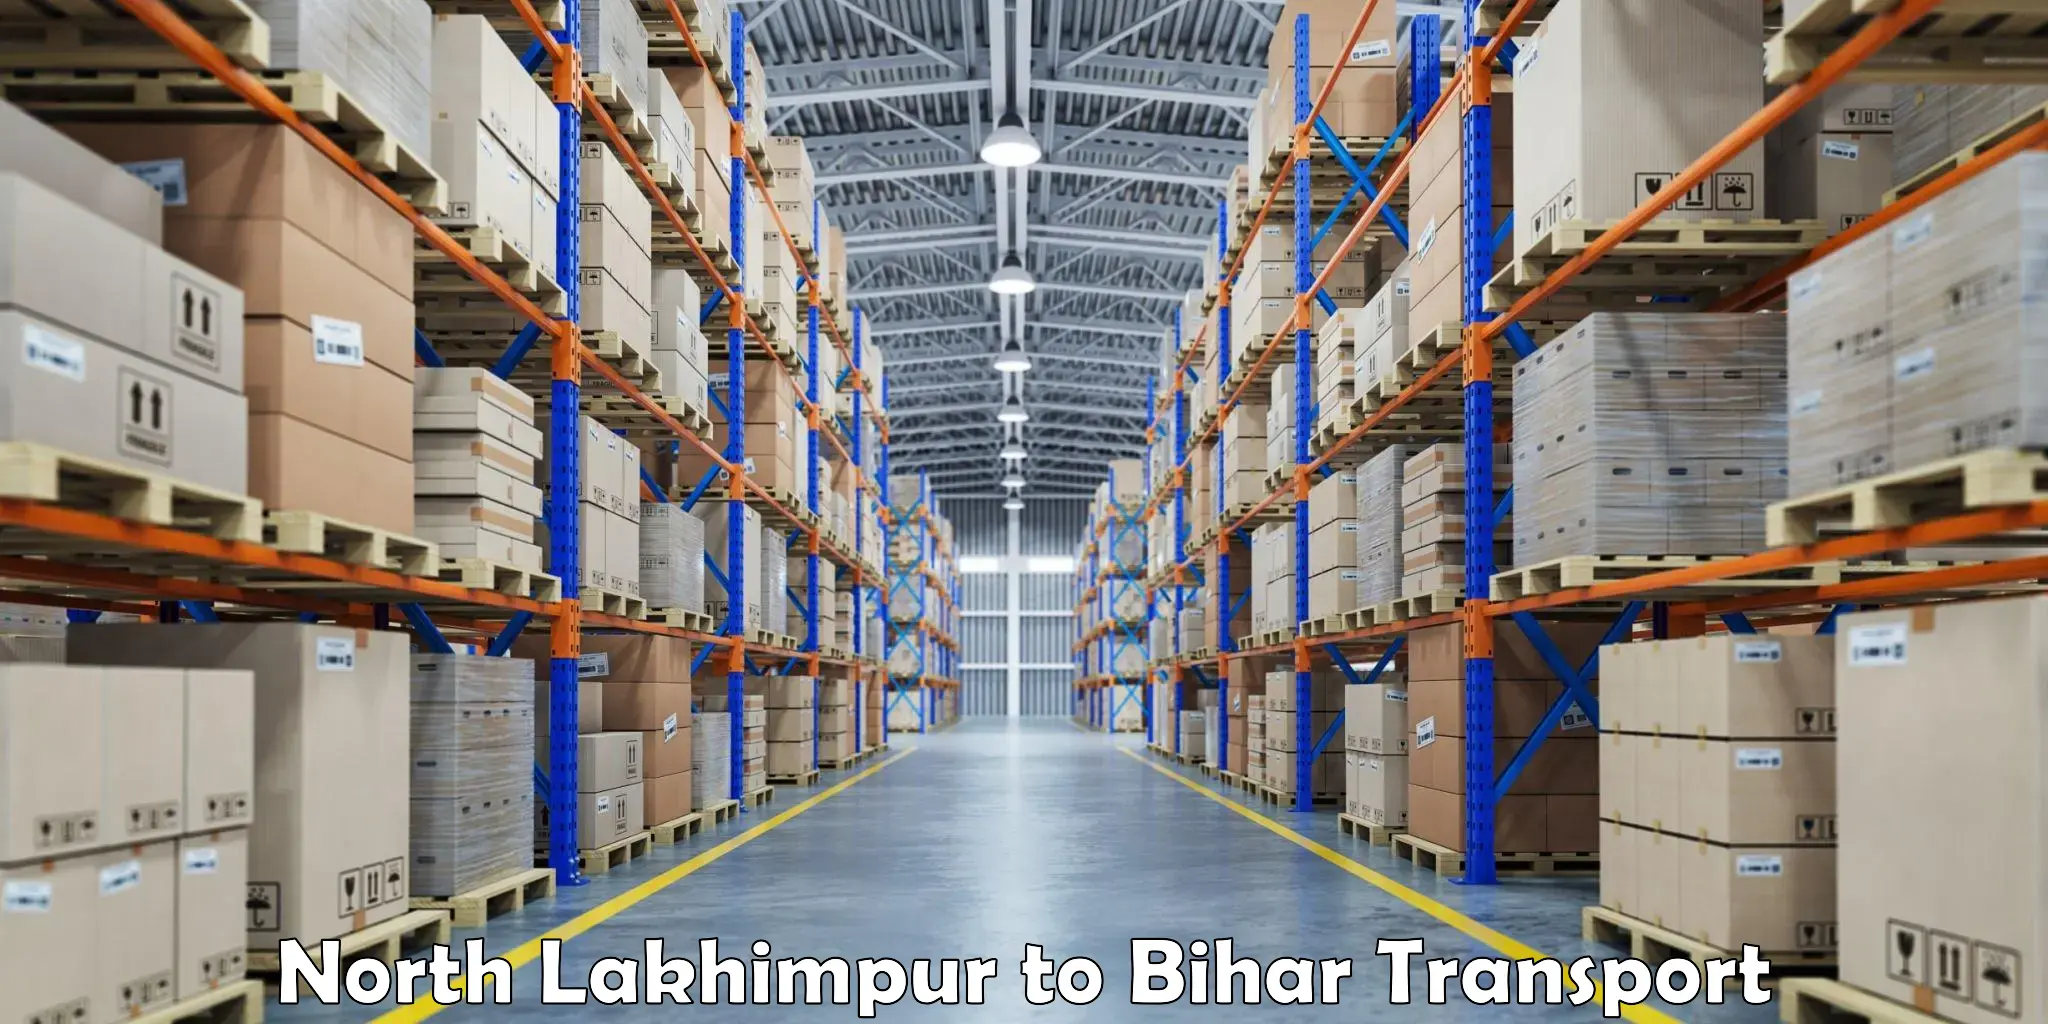 Road transport services in North Lakhimpur to Hasanpura